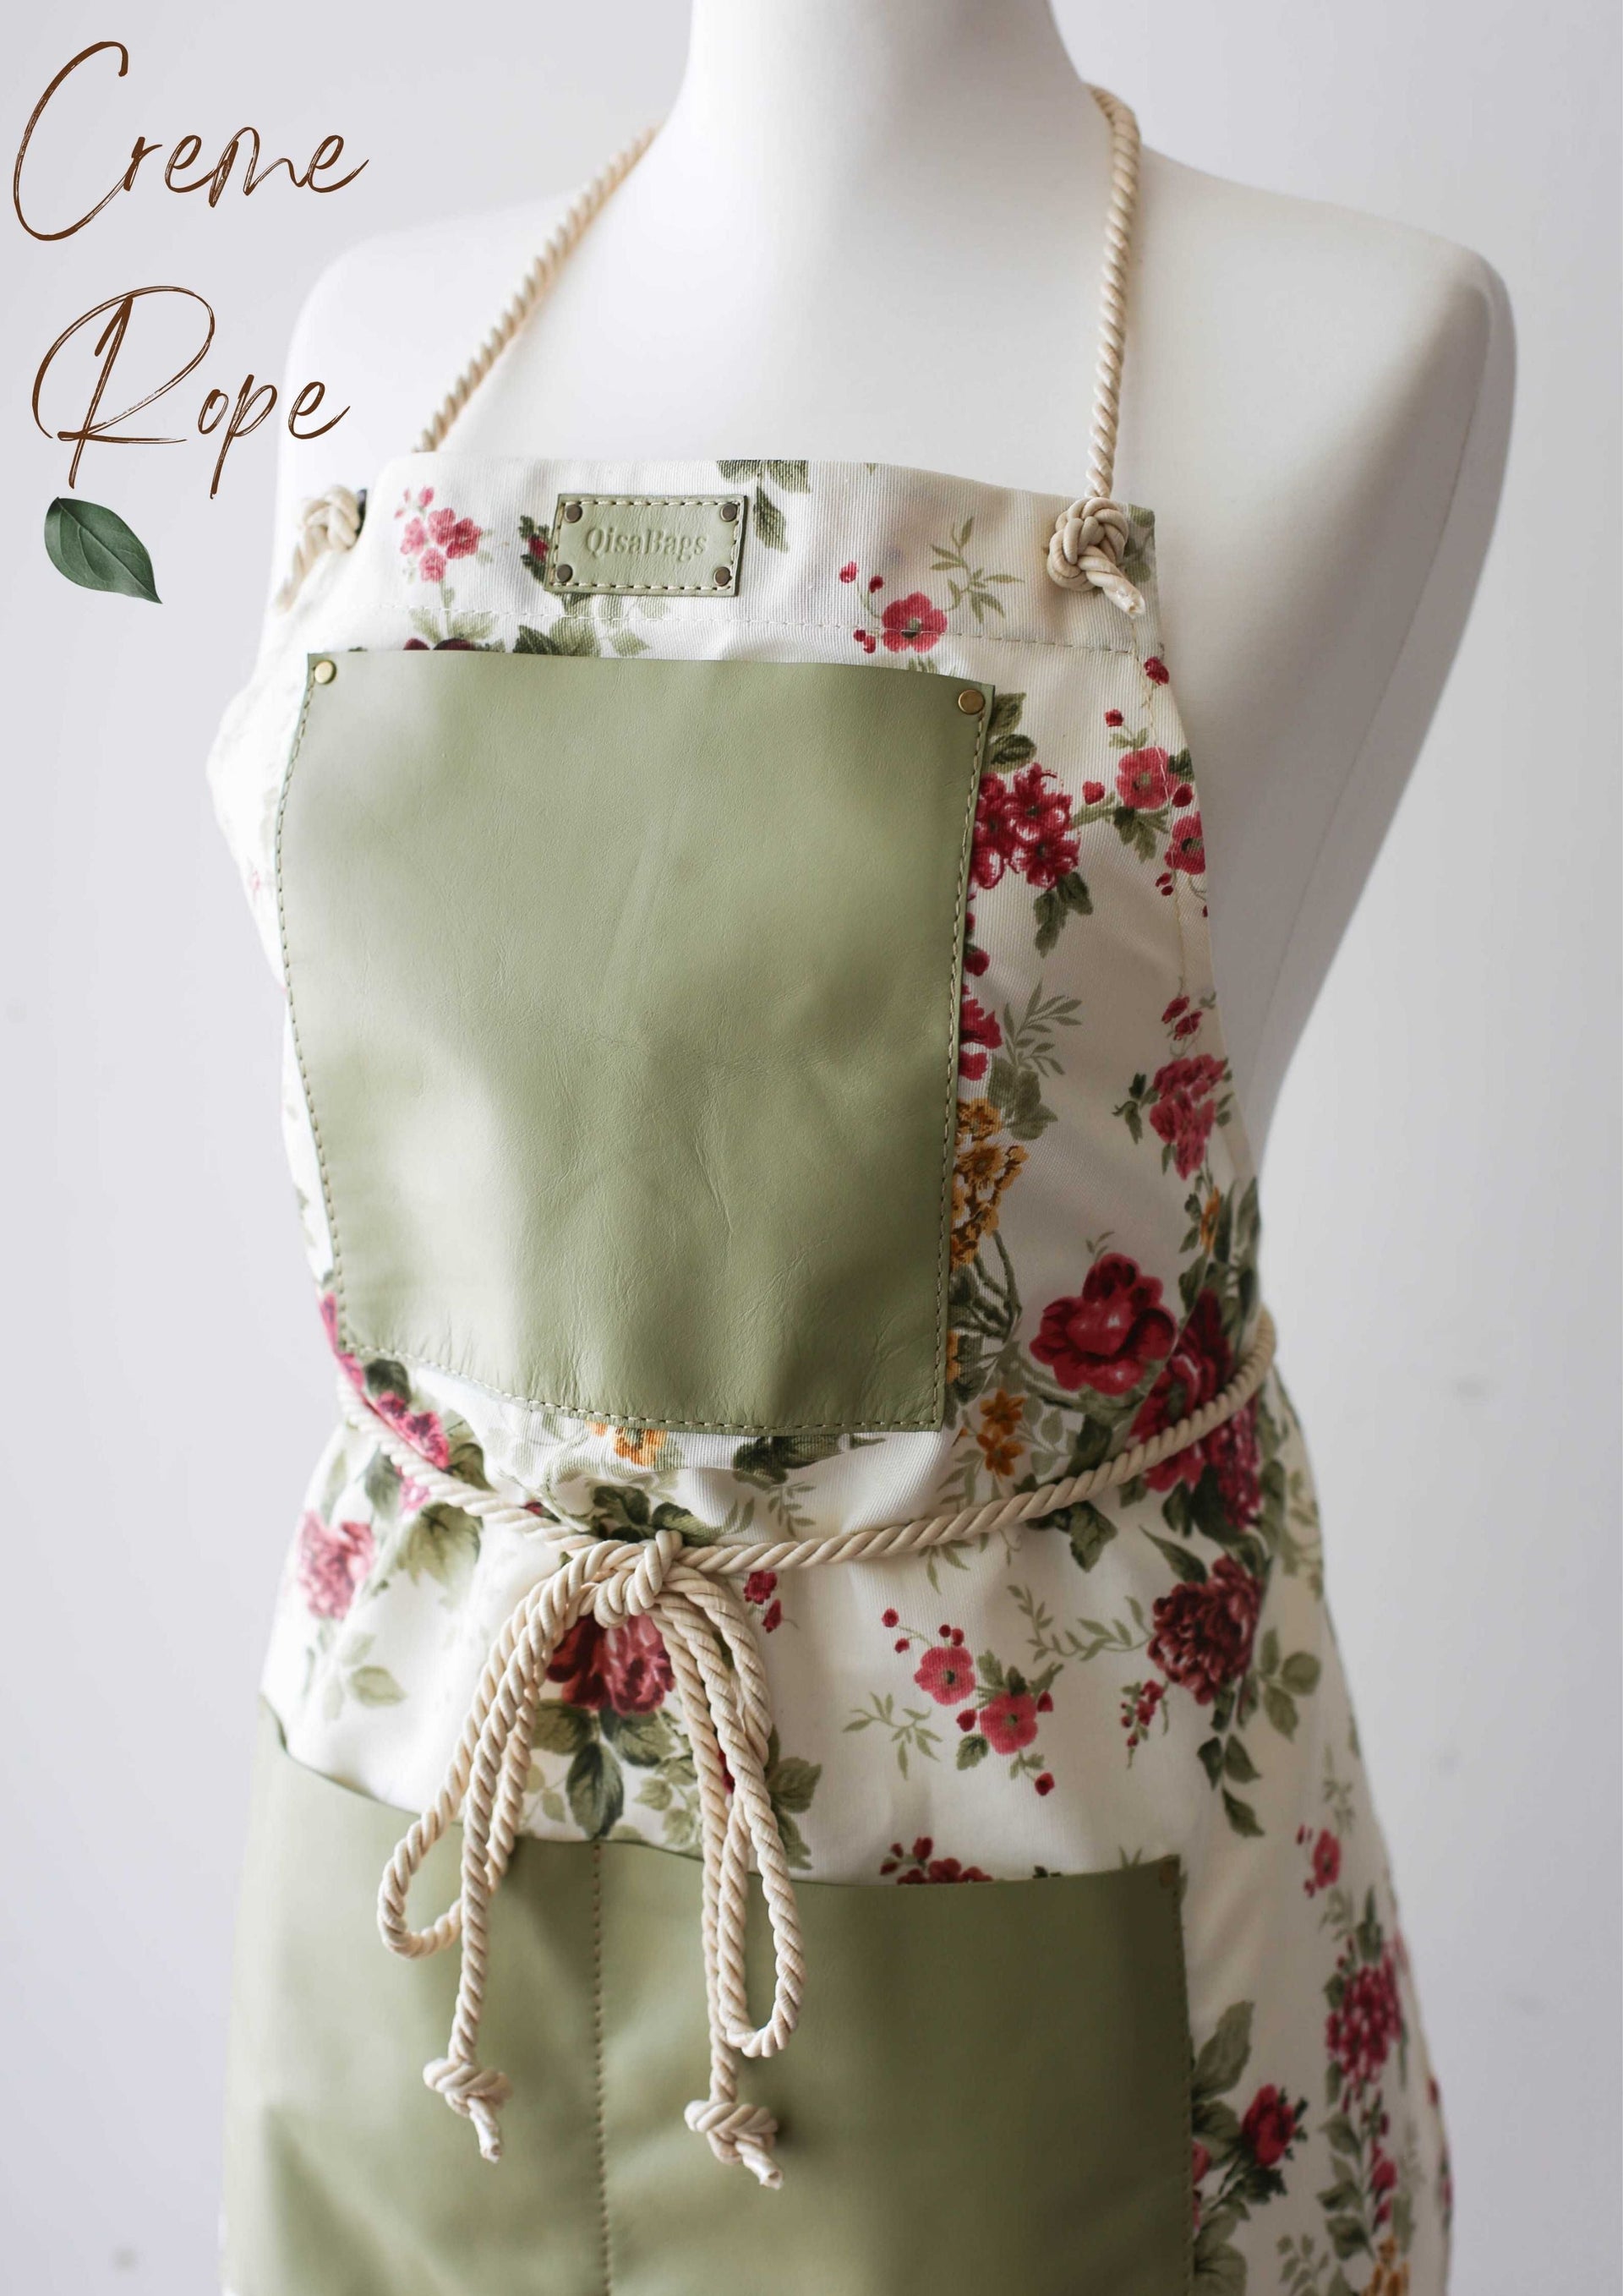 leather cooking apron